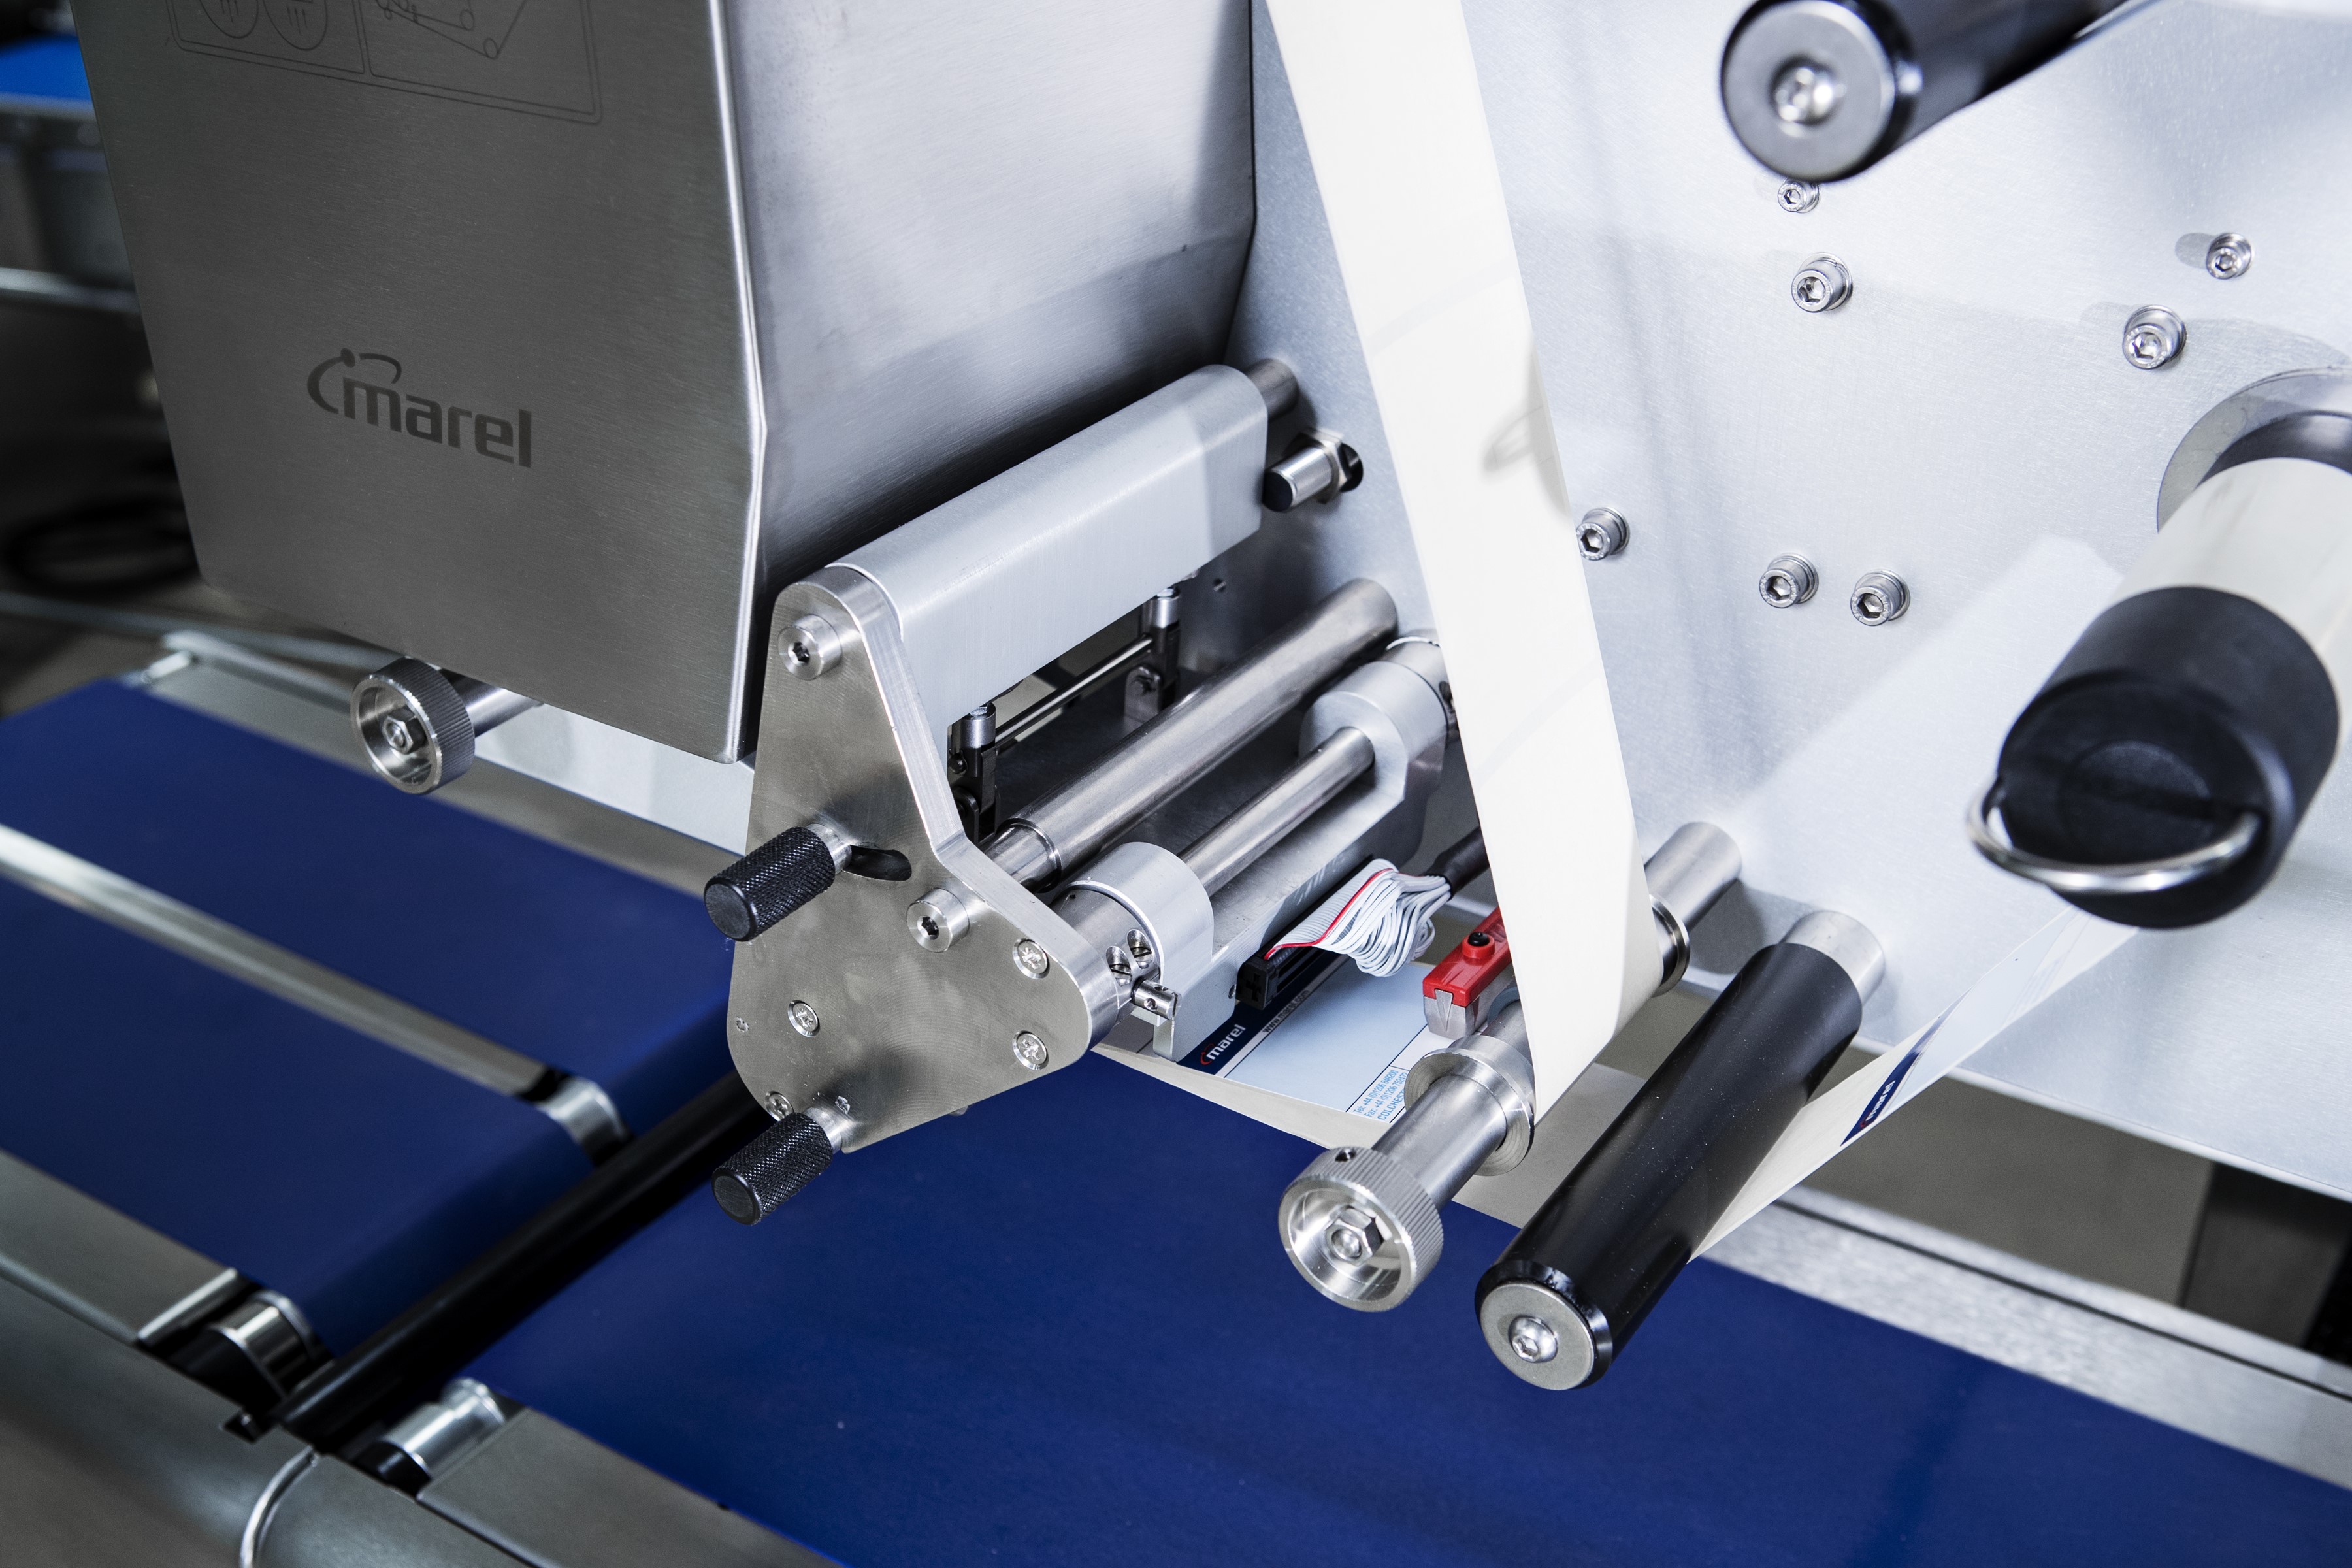 Marel label applicator for packing and labeling pet food and pet treats